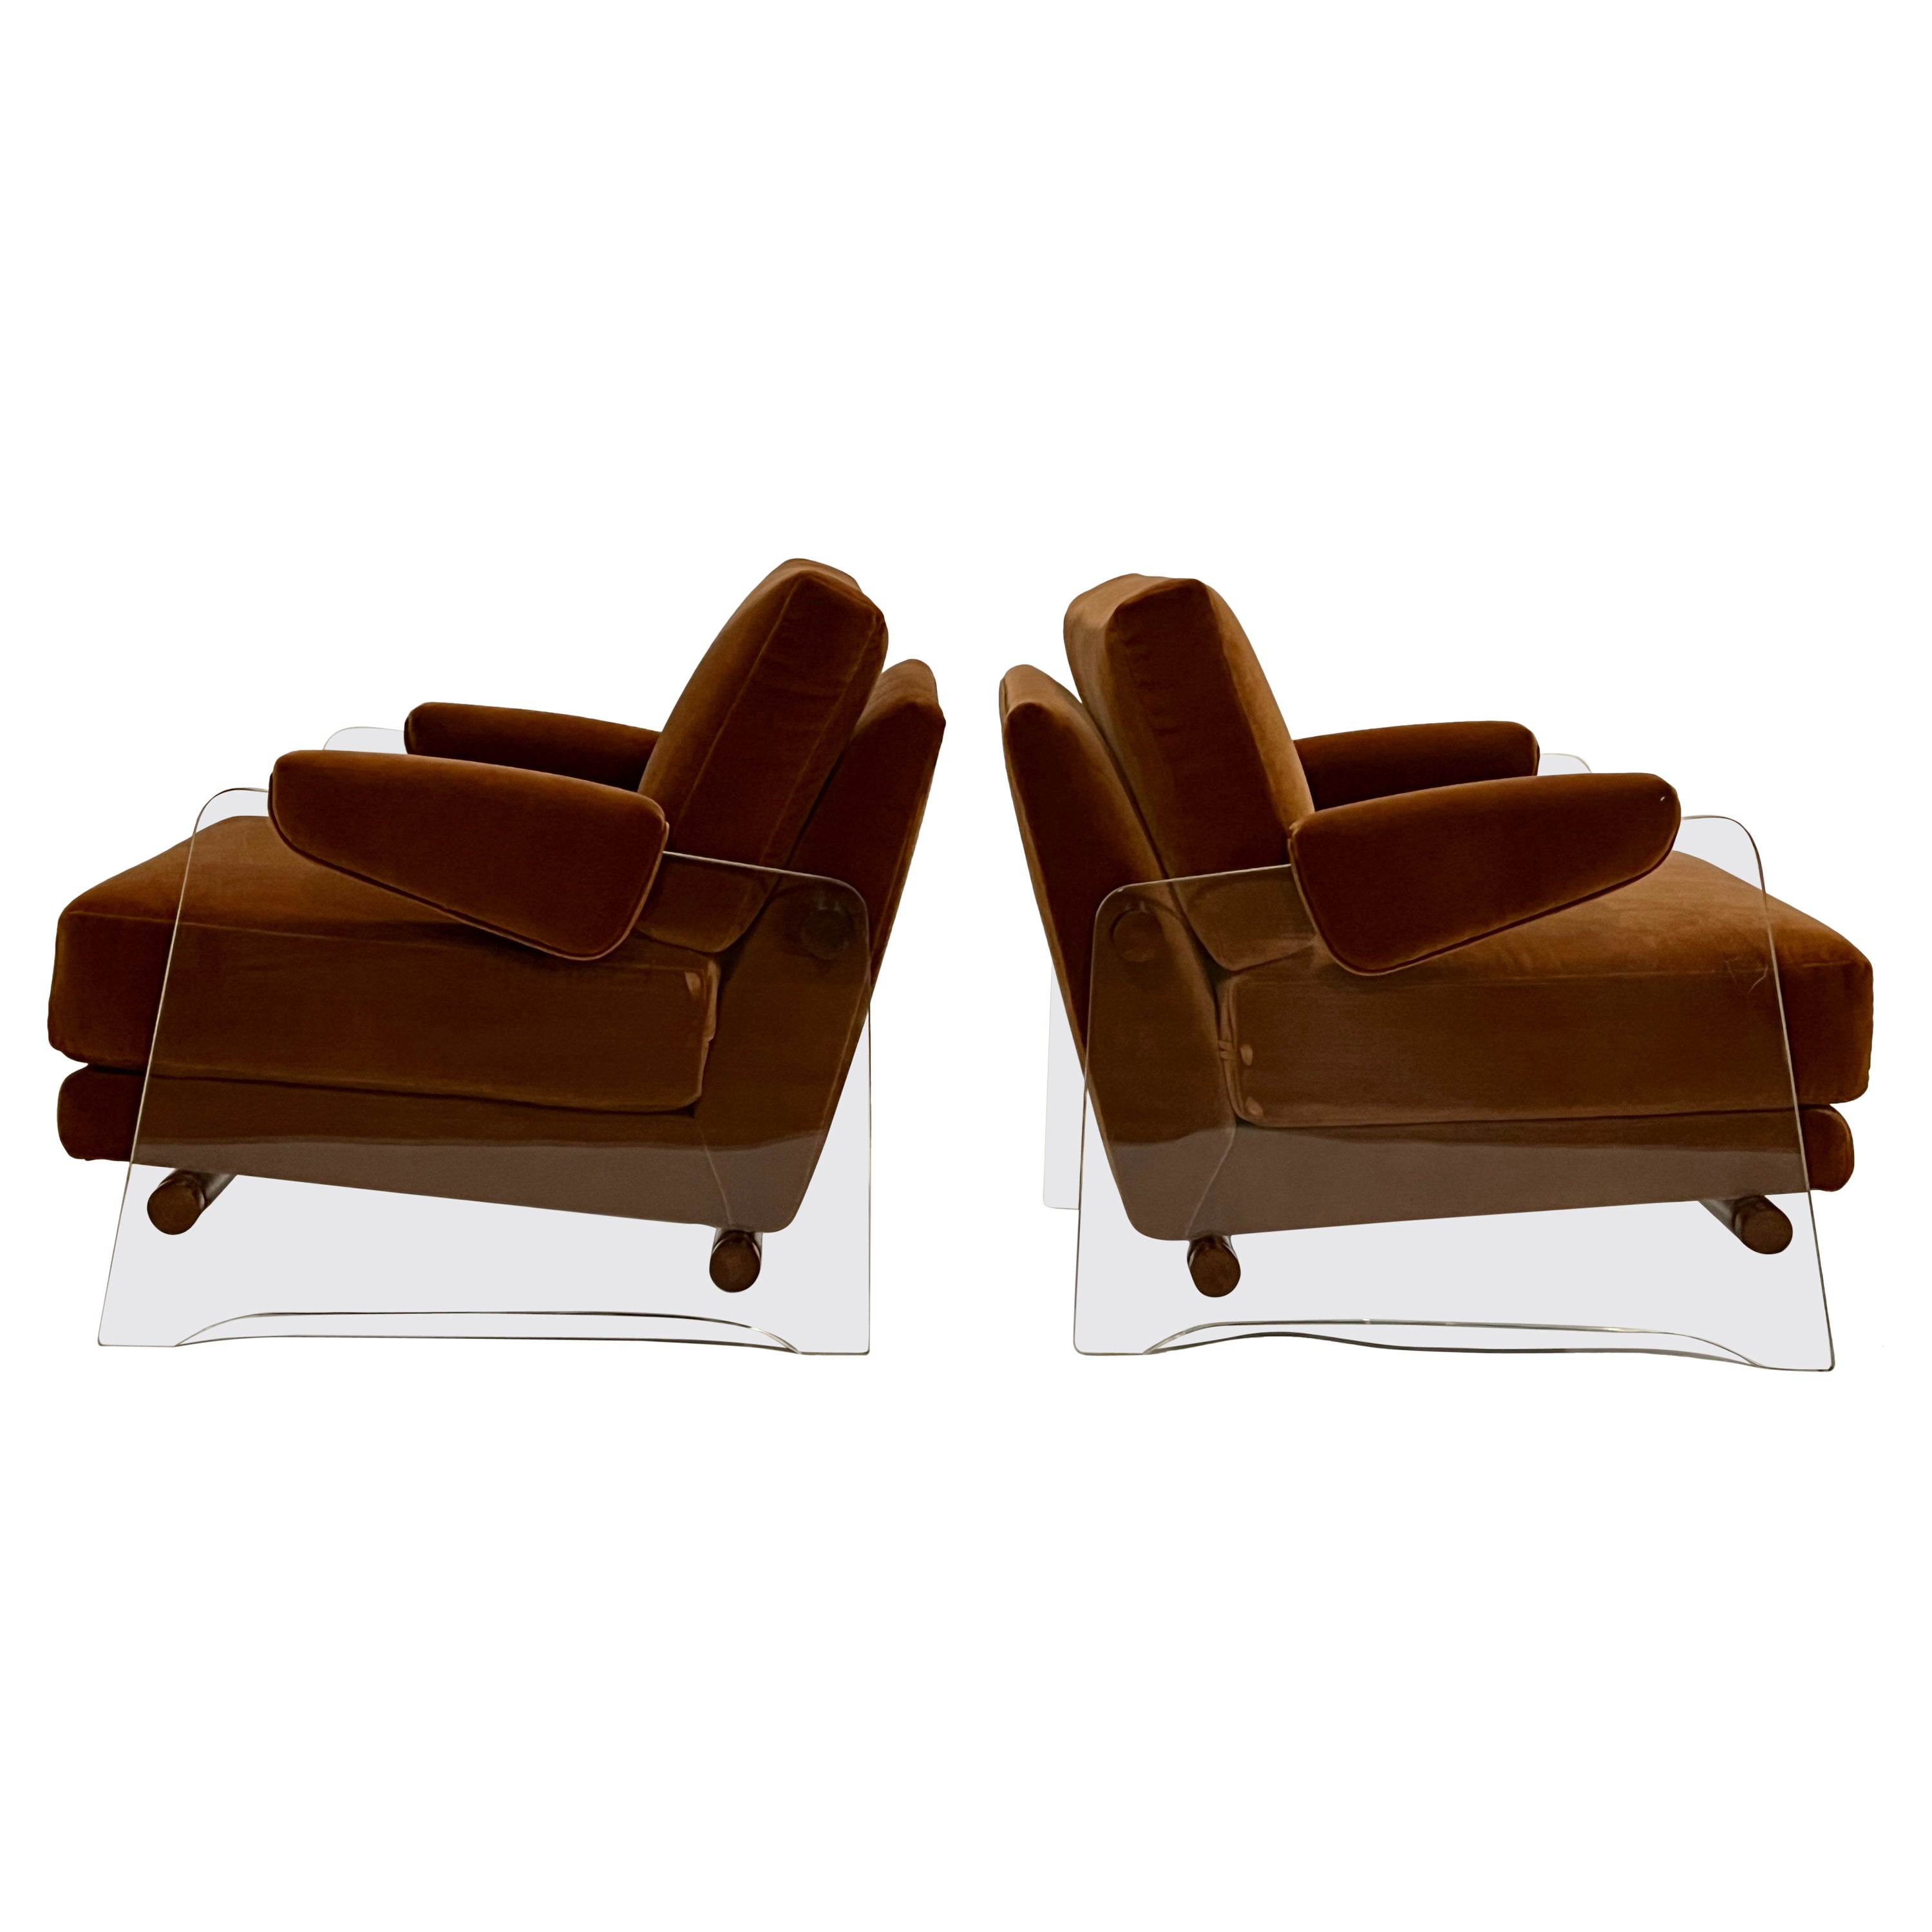 Pair of Lucite Lounge Chairs in Rust Mohair For Sale